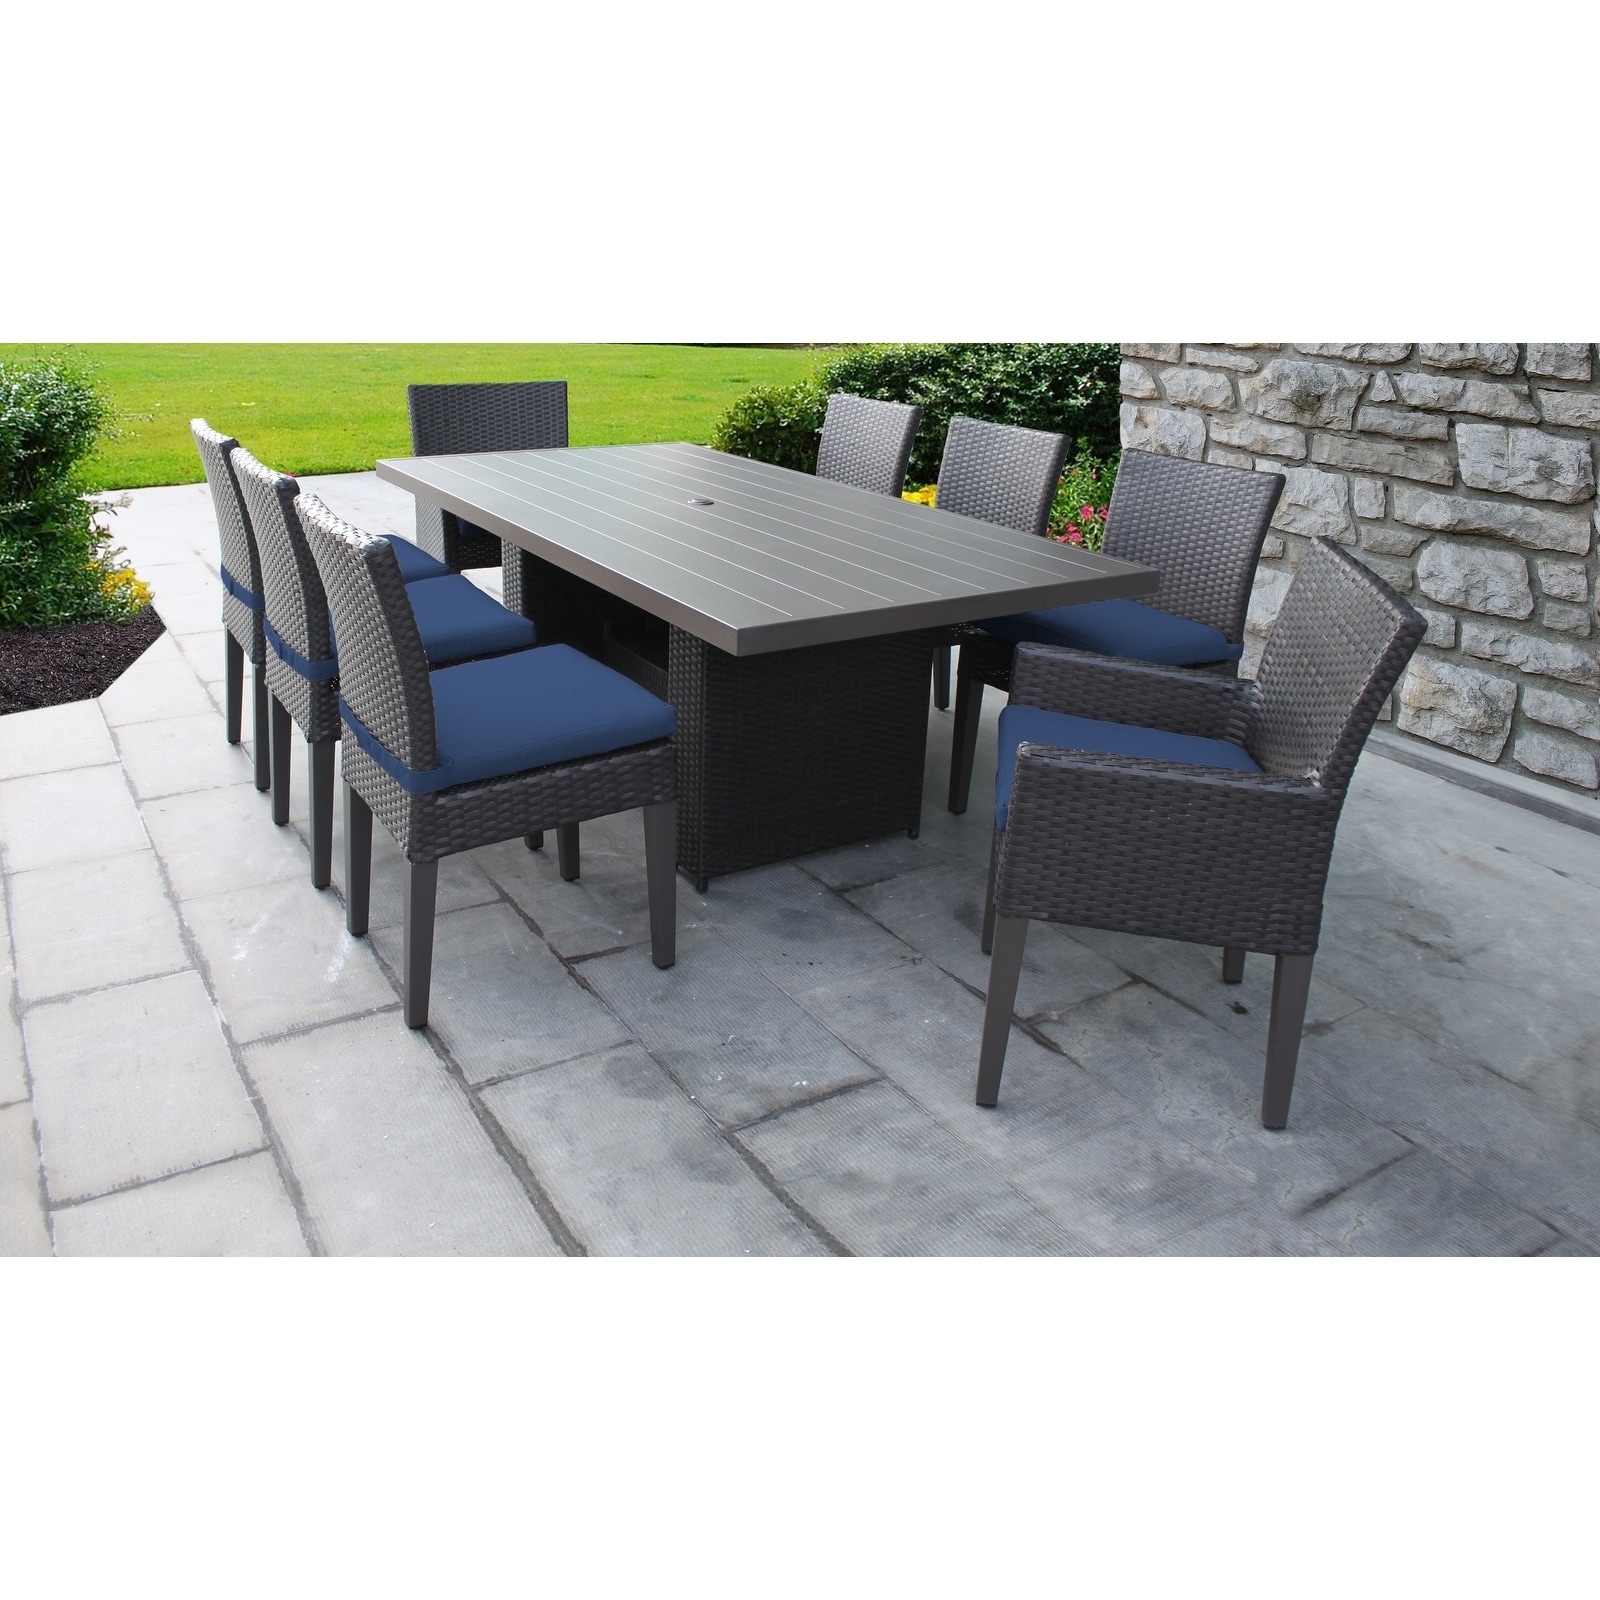 Barbados Rectangular Outdoor Patio Dining Table With 6 Armless Chairs And 2 Chairs W/ Arms